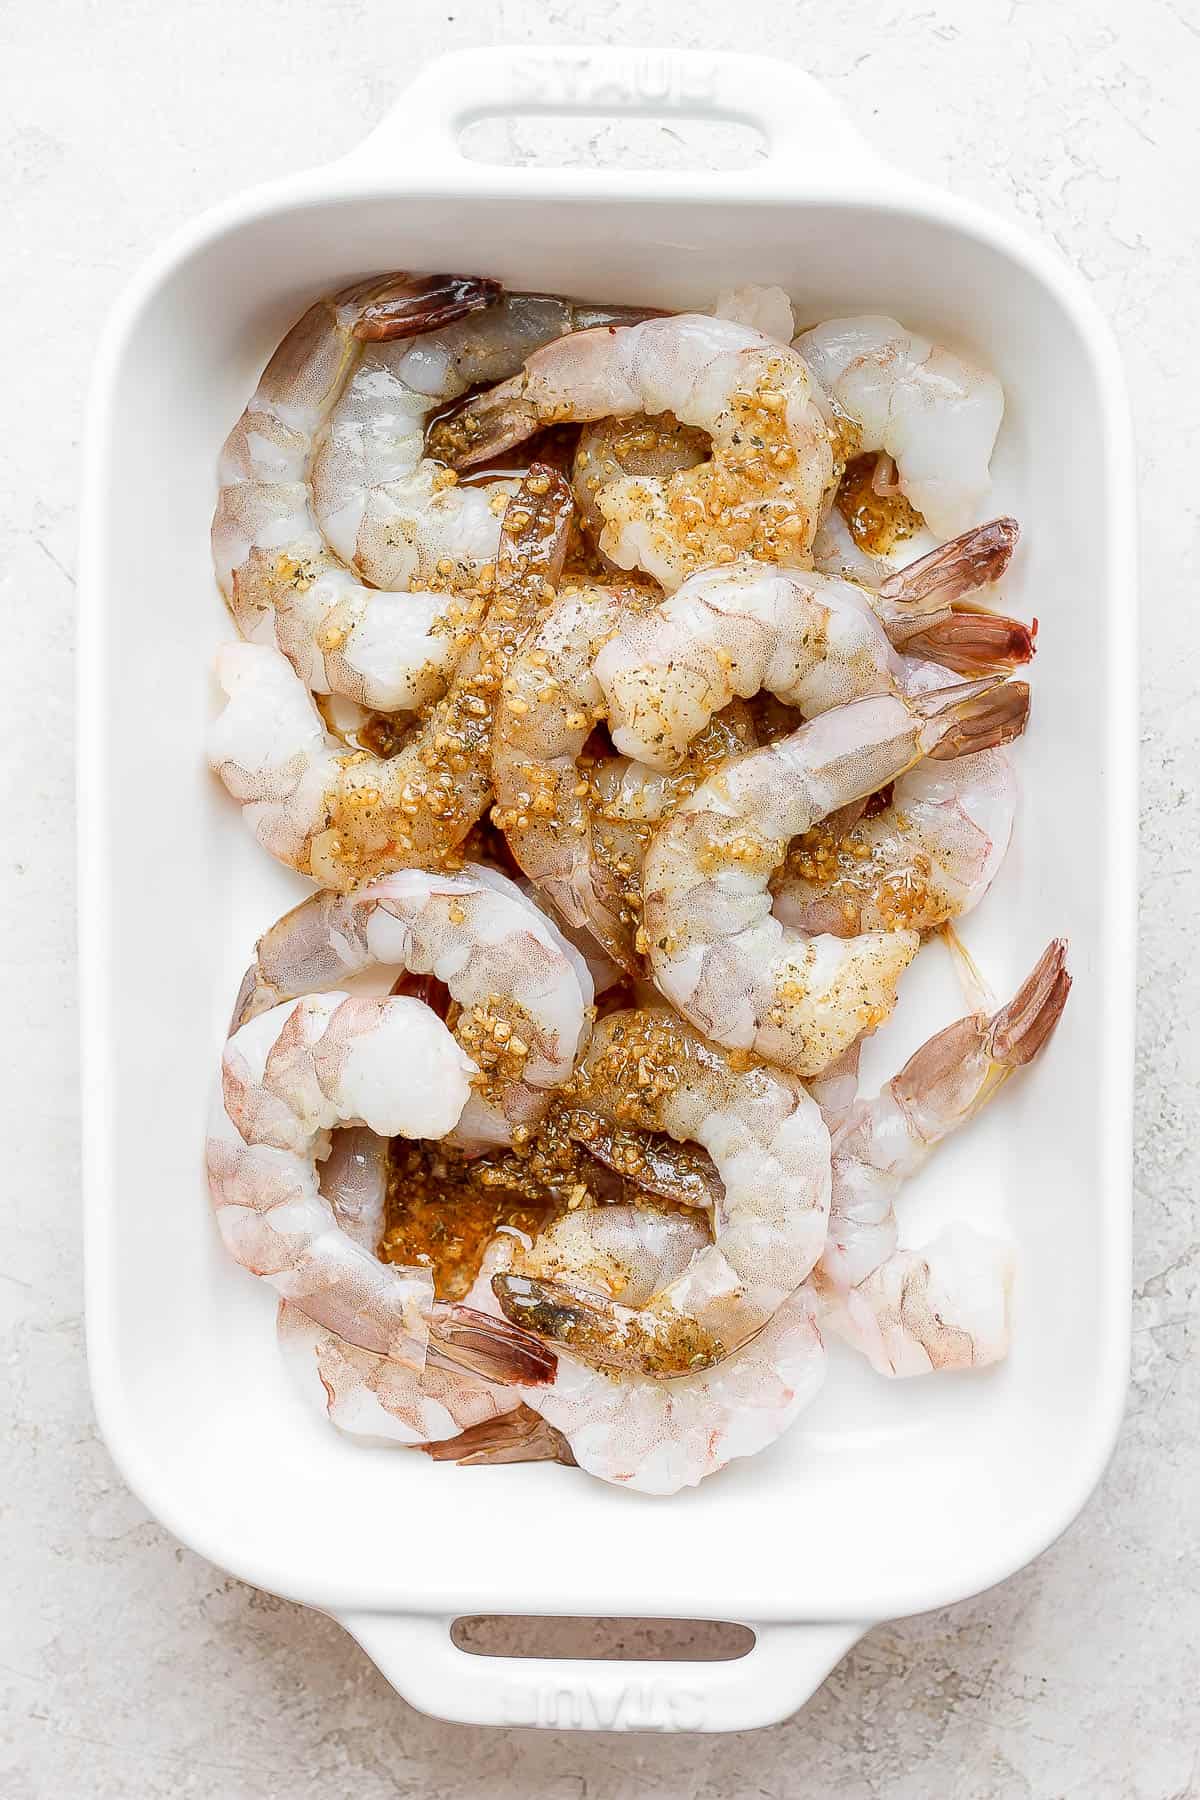 Raw shrimp in a dish with marinade on top.